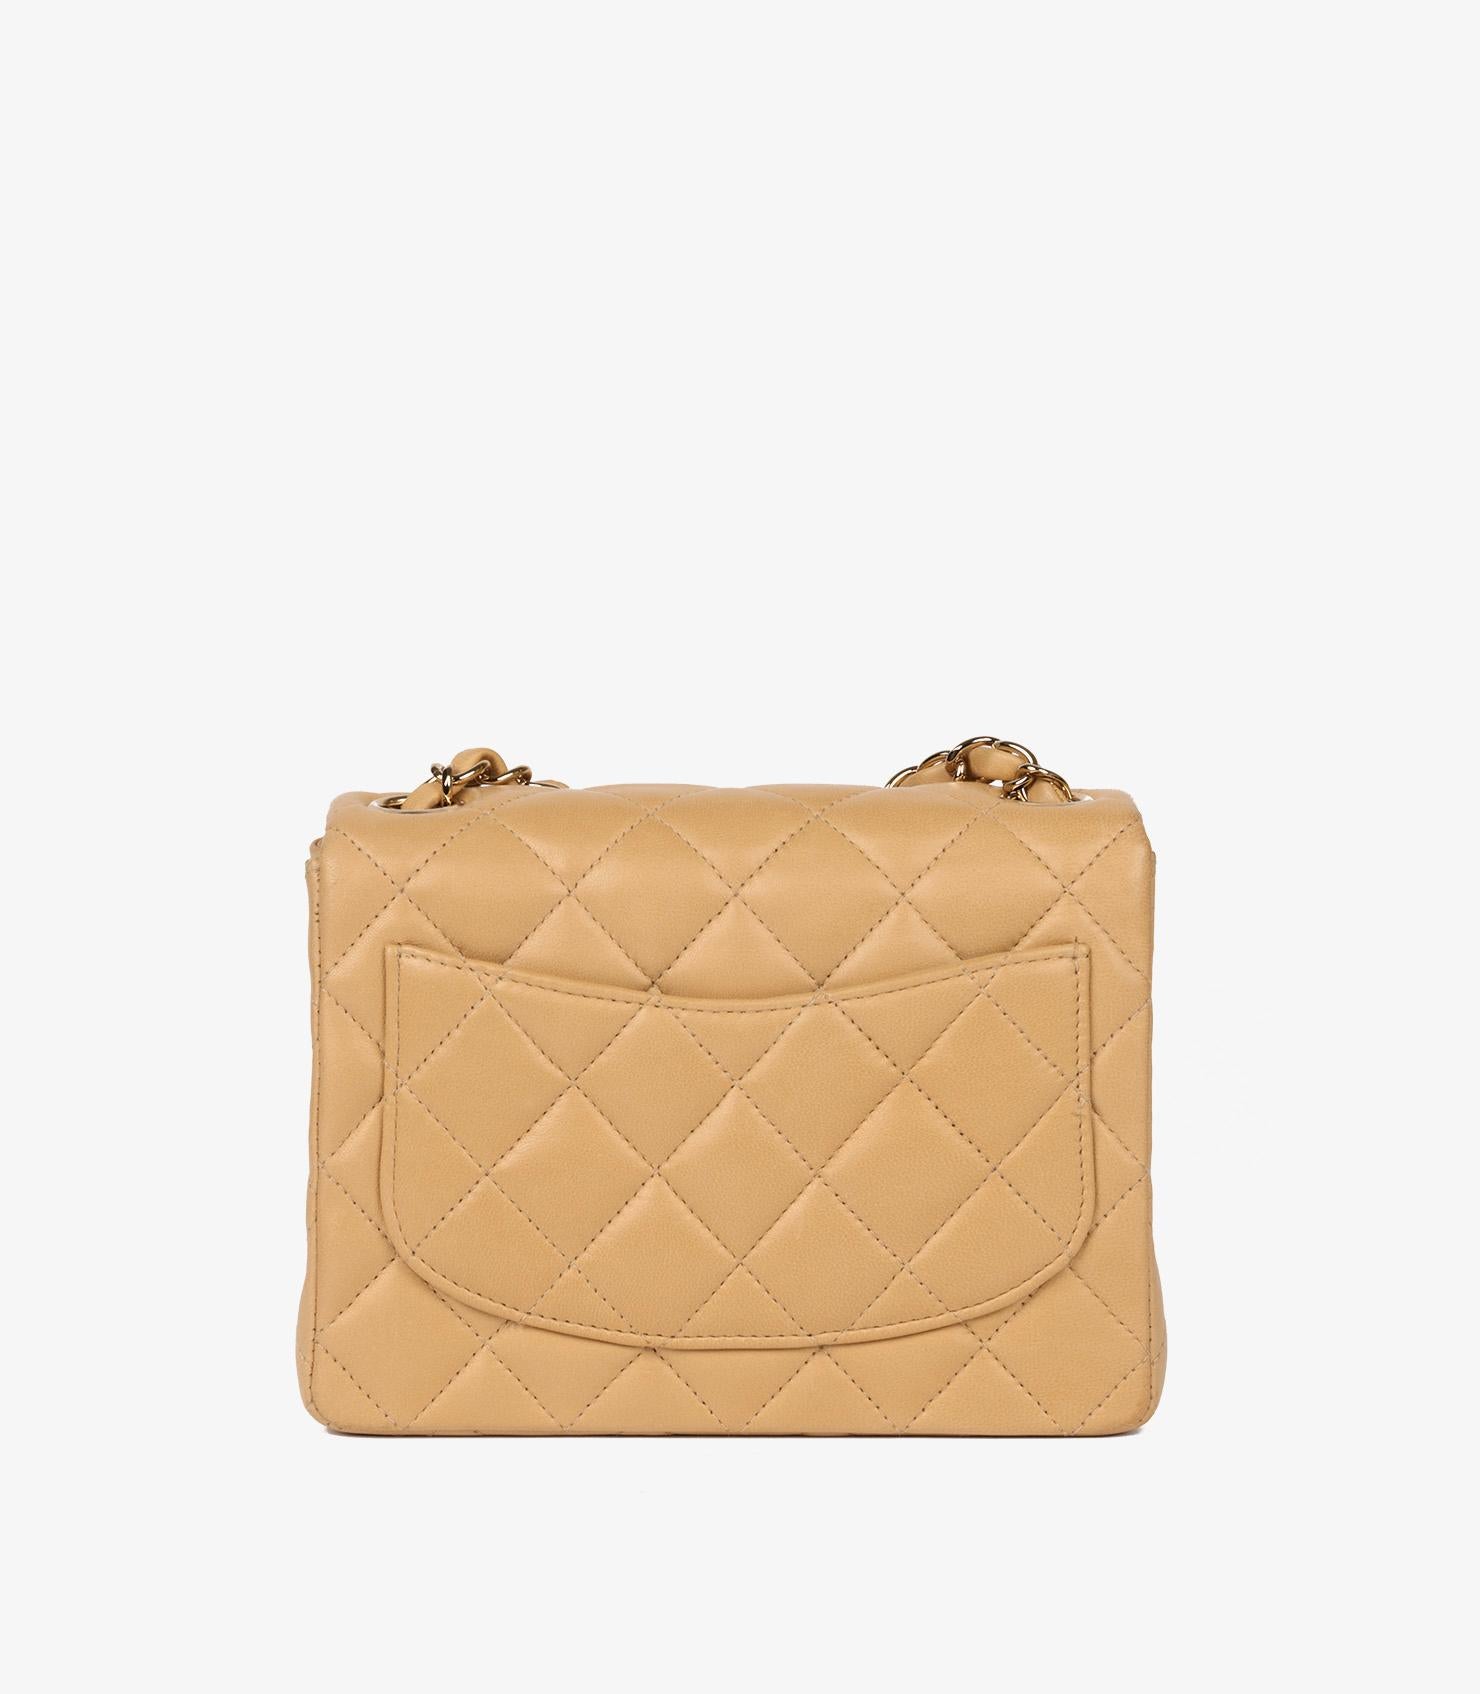 Chanel Beige Quilted Lambskin Vintage Square Classic Mini Flap Bag 1